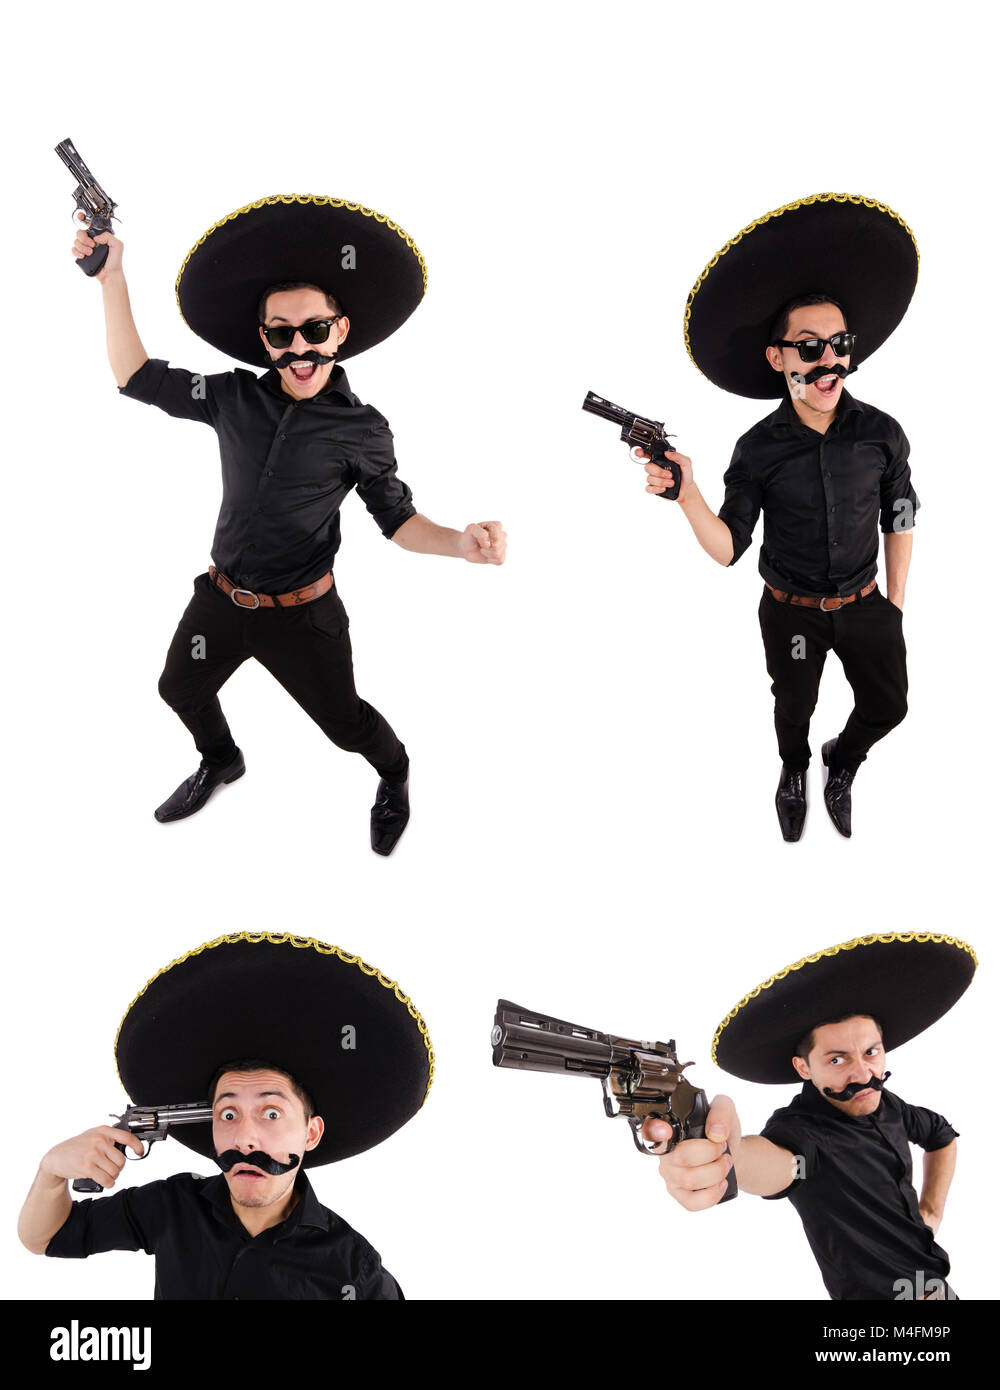 Funny mexican with sombrero hat Stock Photo - Alamy